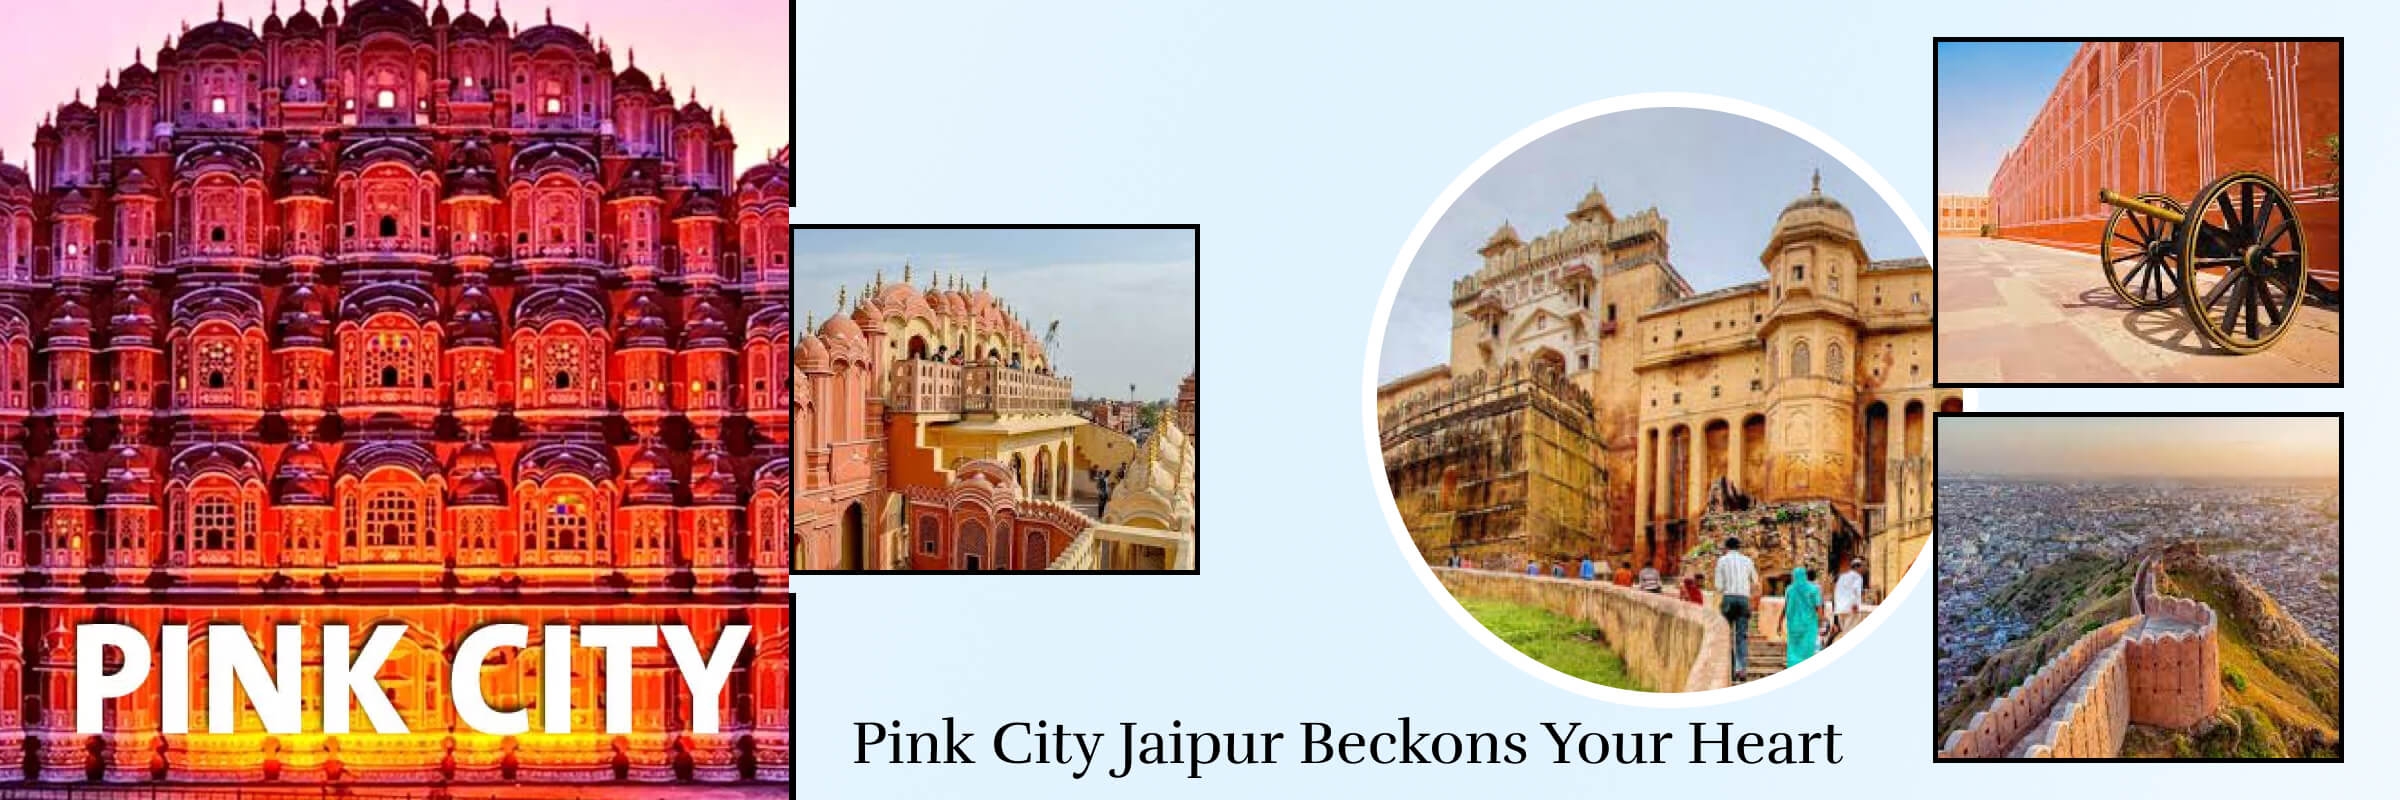 Let's fall in love with Pink City- Jaipur